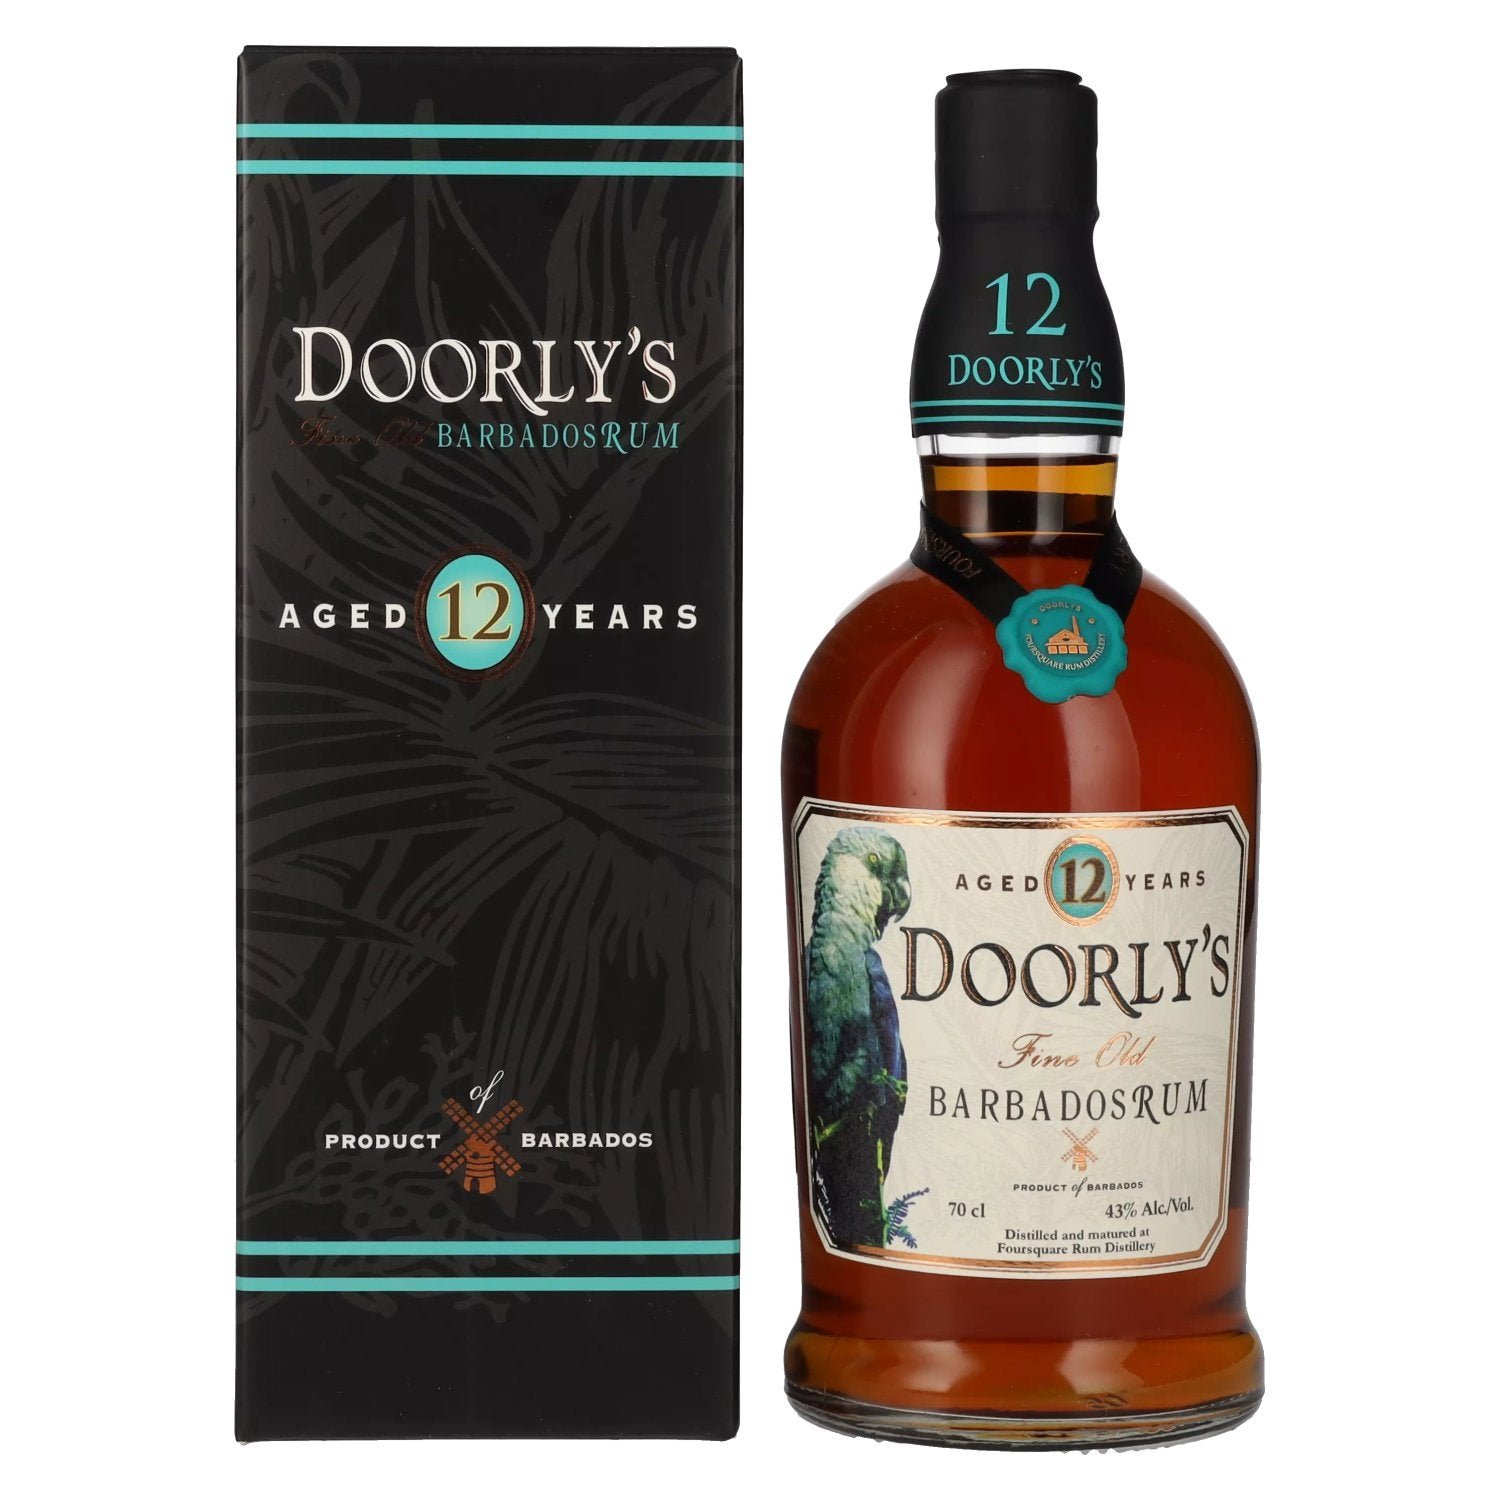 Doorly's 12 Years Old Fine Old Barbados Rum 43% Vol. 0,7l in Giftbox